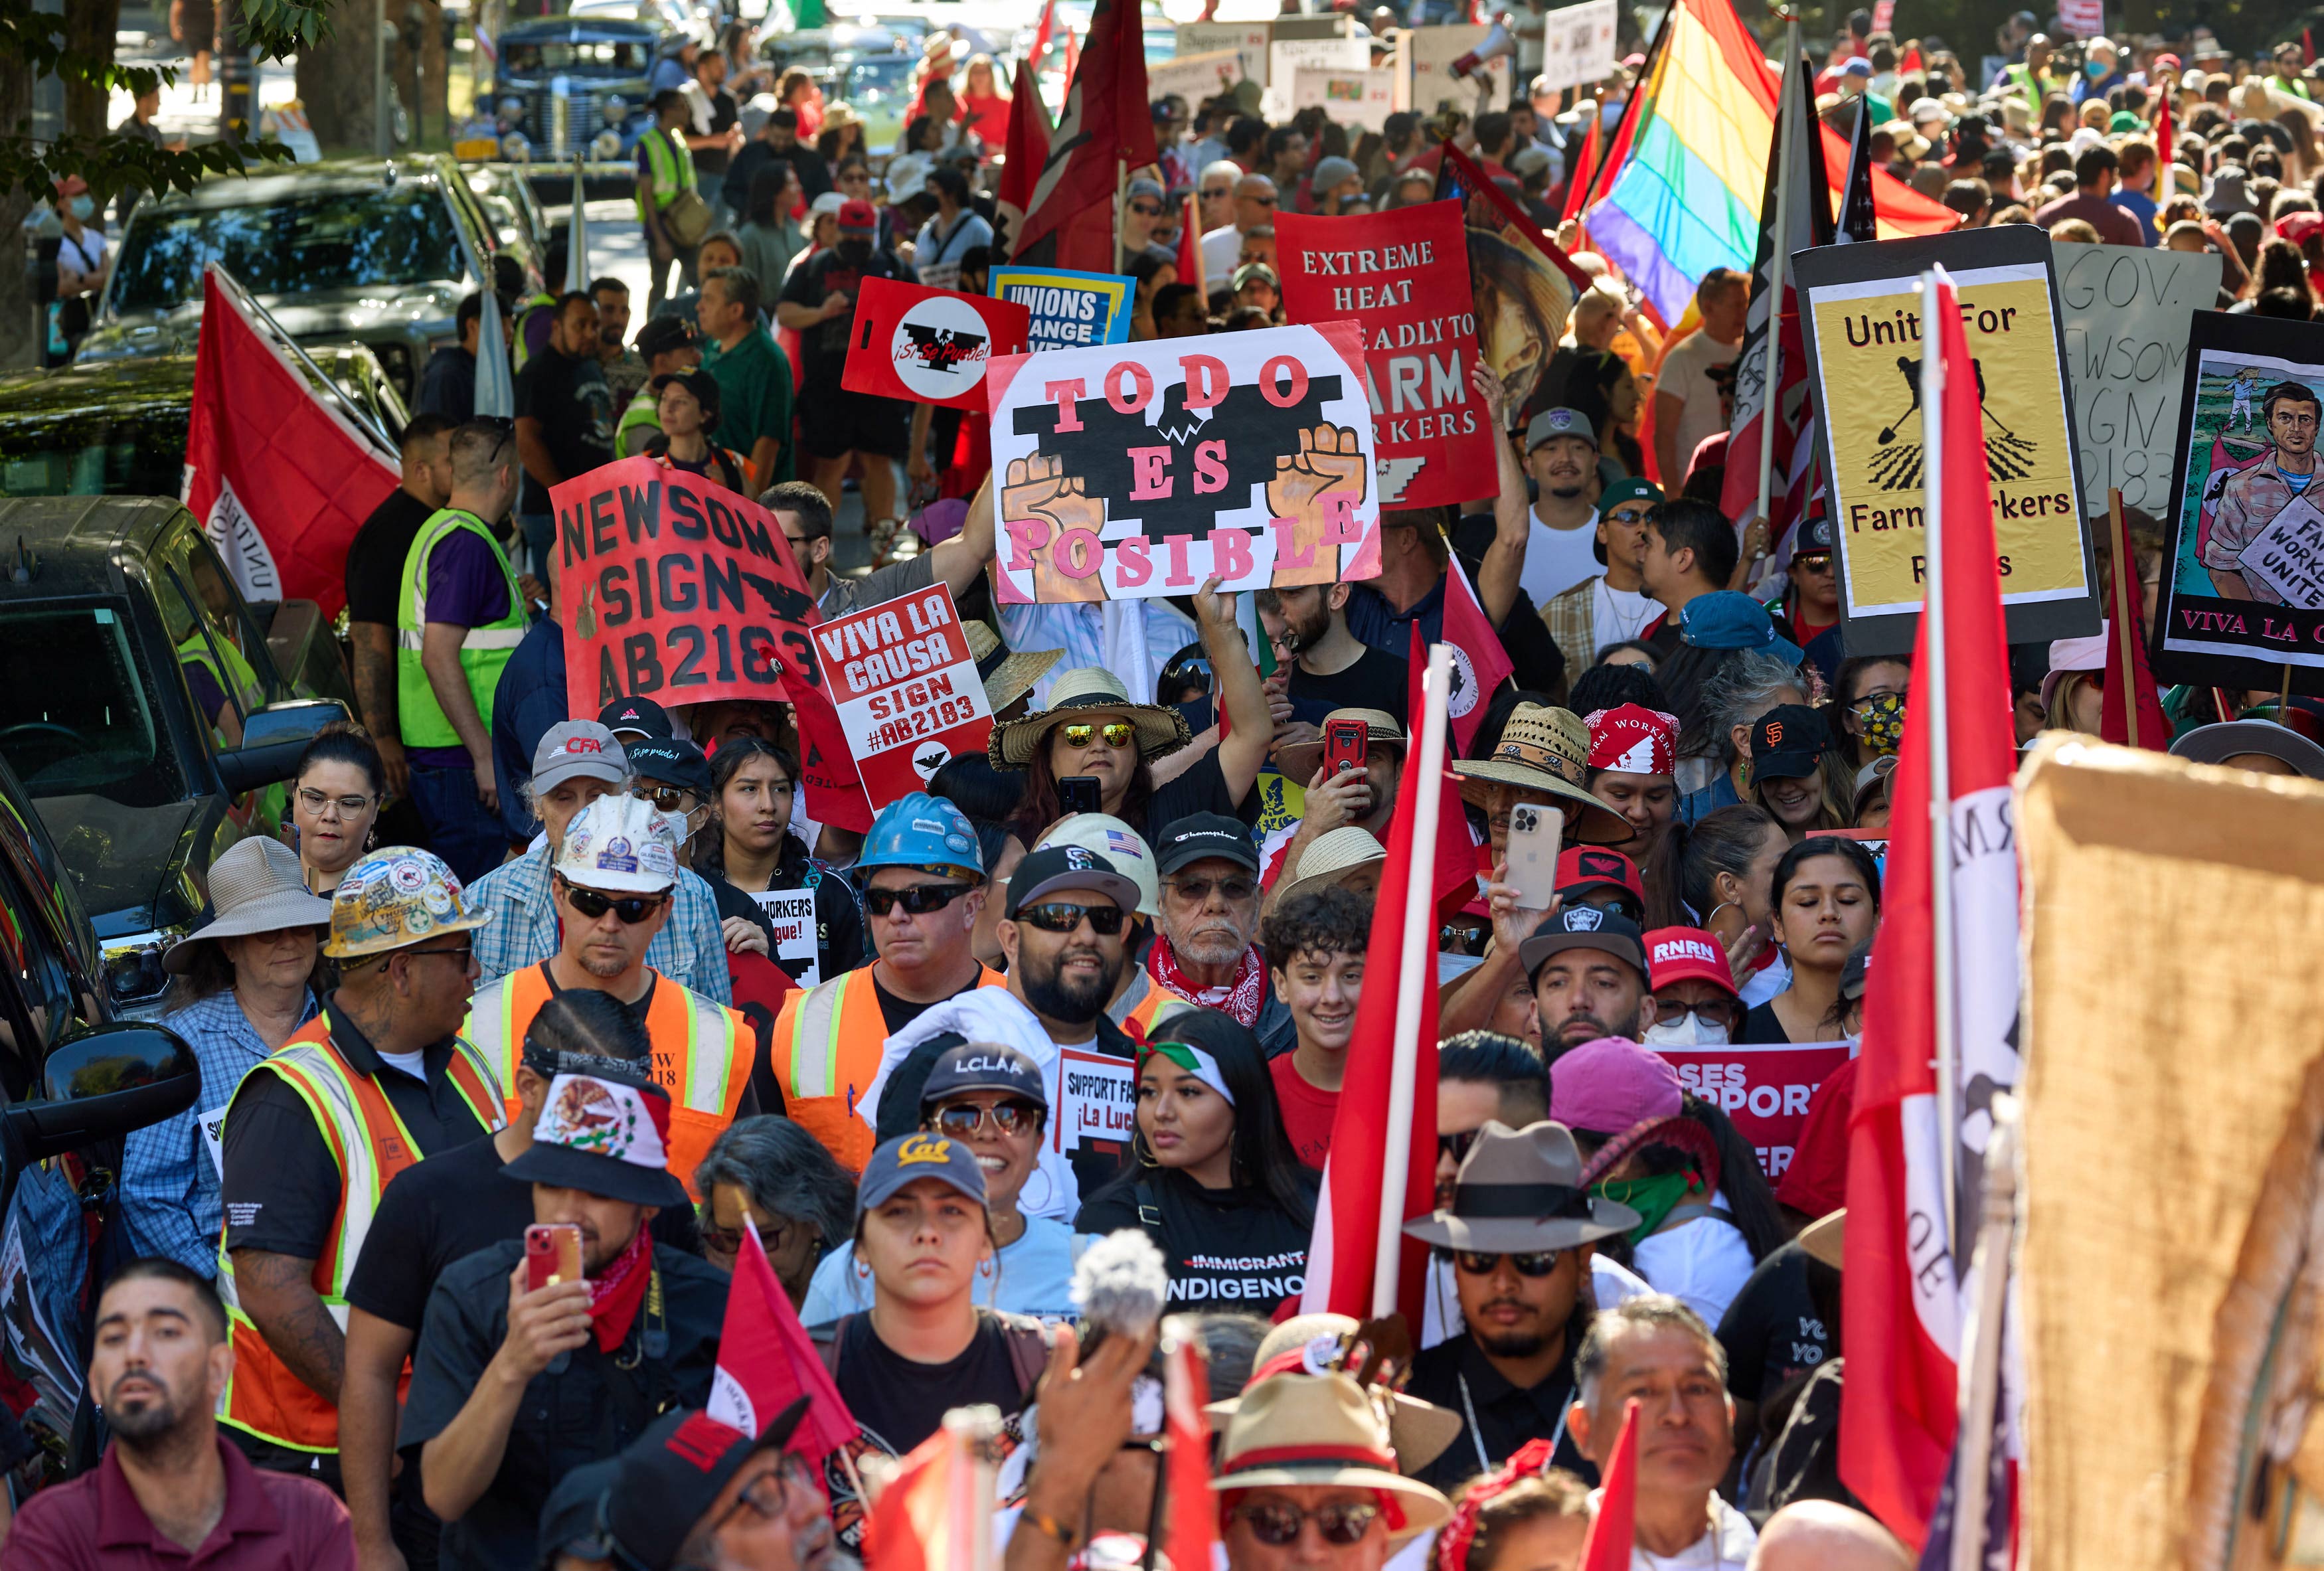 March for Farm Worker Rights Bill